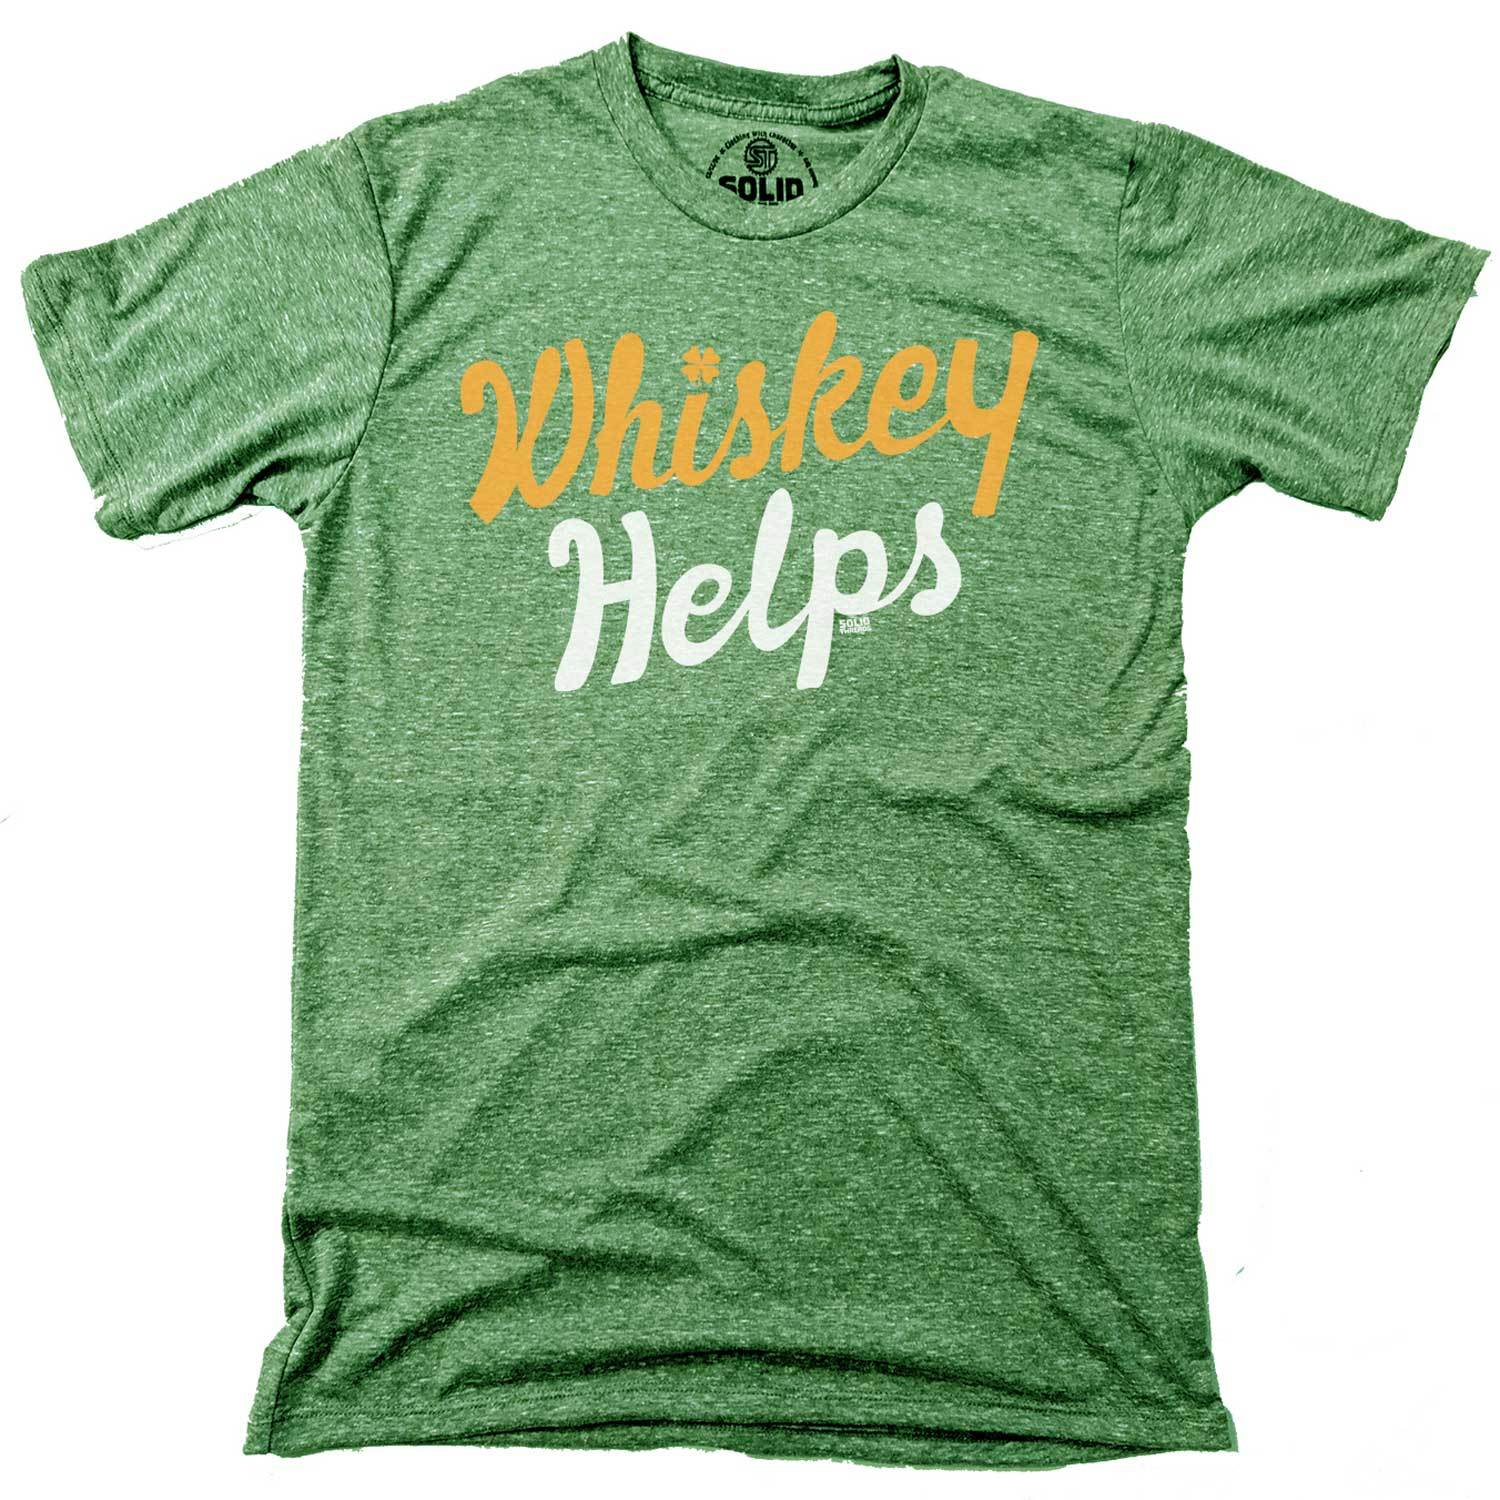 Men's Irish Whiskey Helps Vintage Inspired T-shirt with cool St. Paddy ...